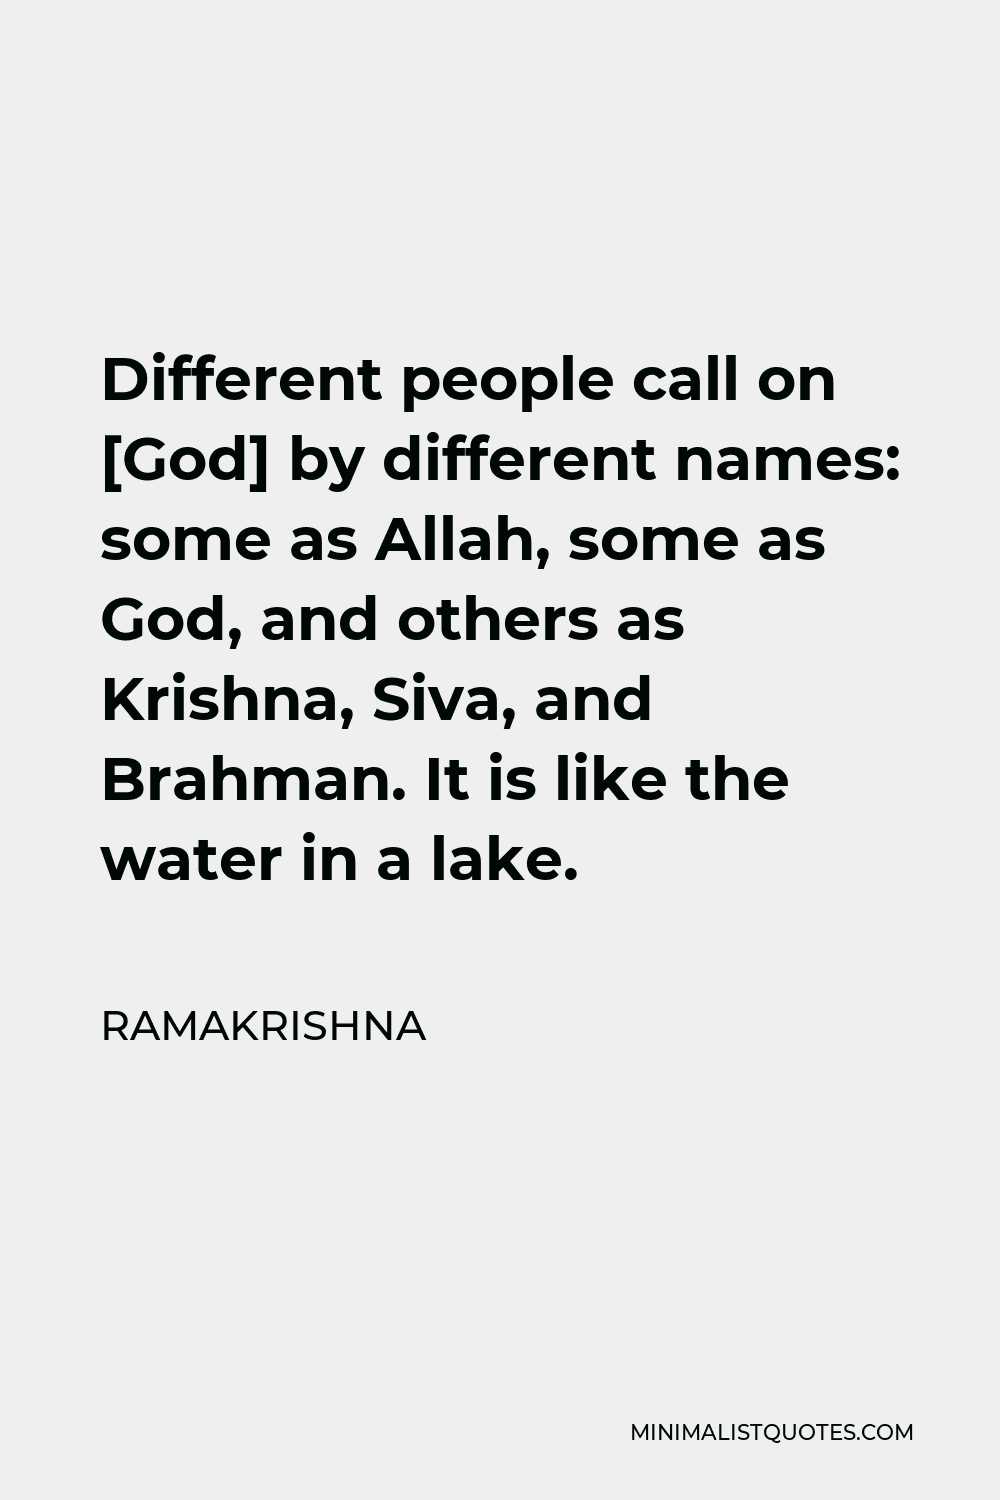 Ramakrishna Quote - Different people call on [God] by different names: some as Allah, some as God, and others as Krishna, Siva, and Brahman. It is like the water in a lake.